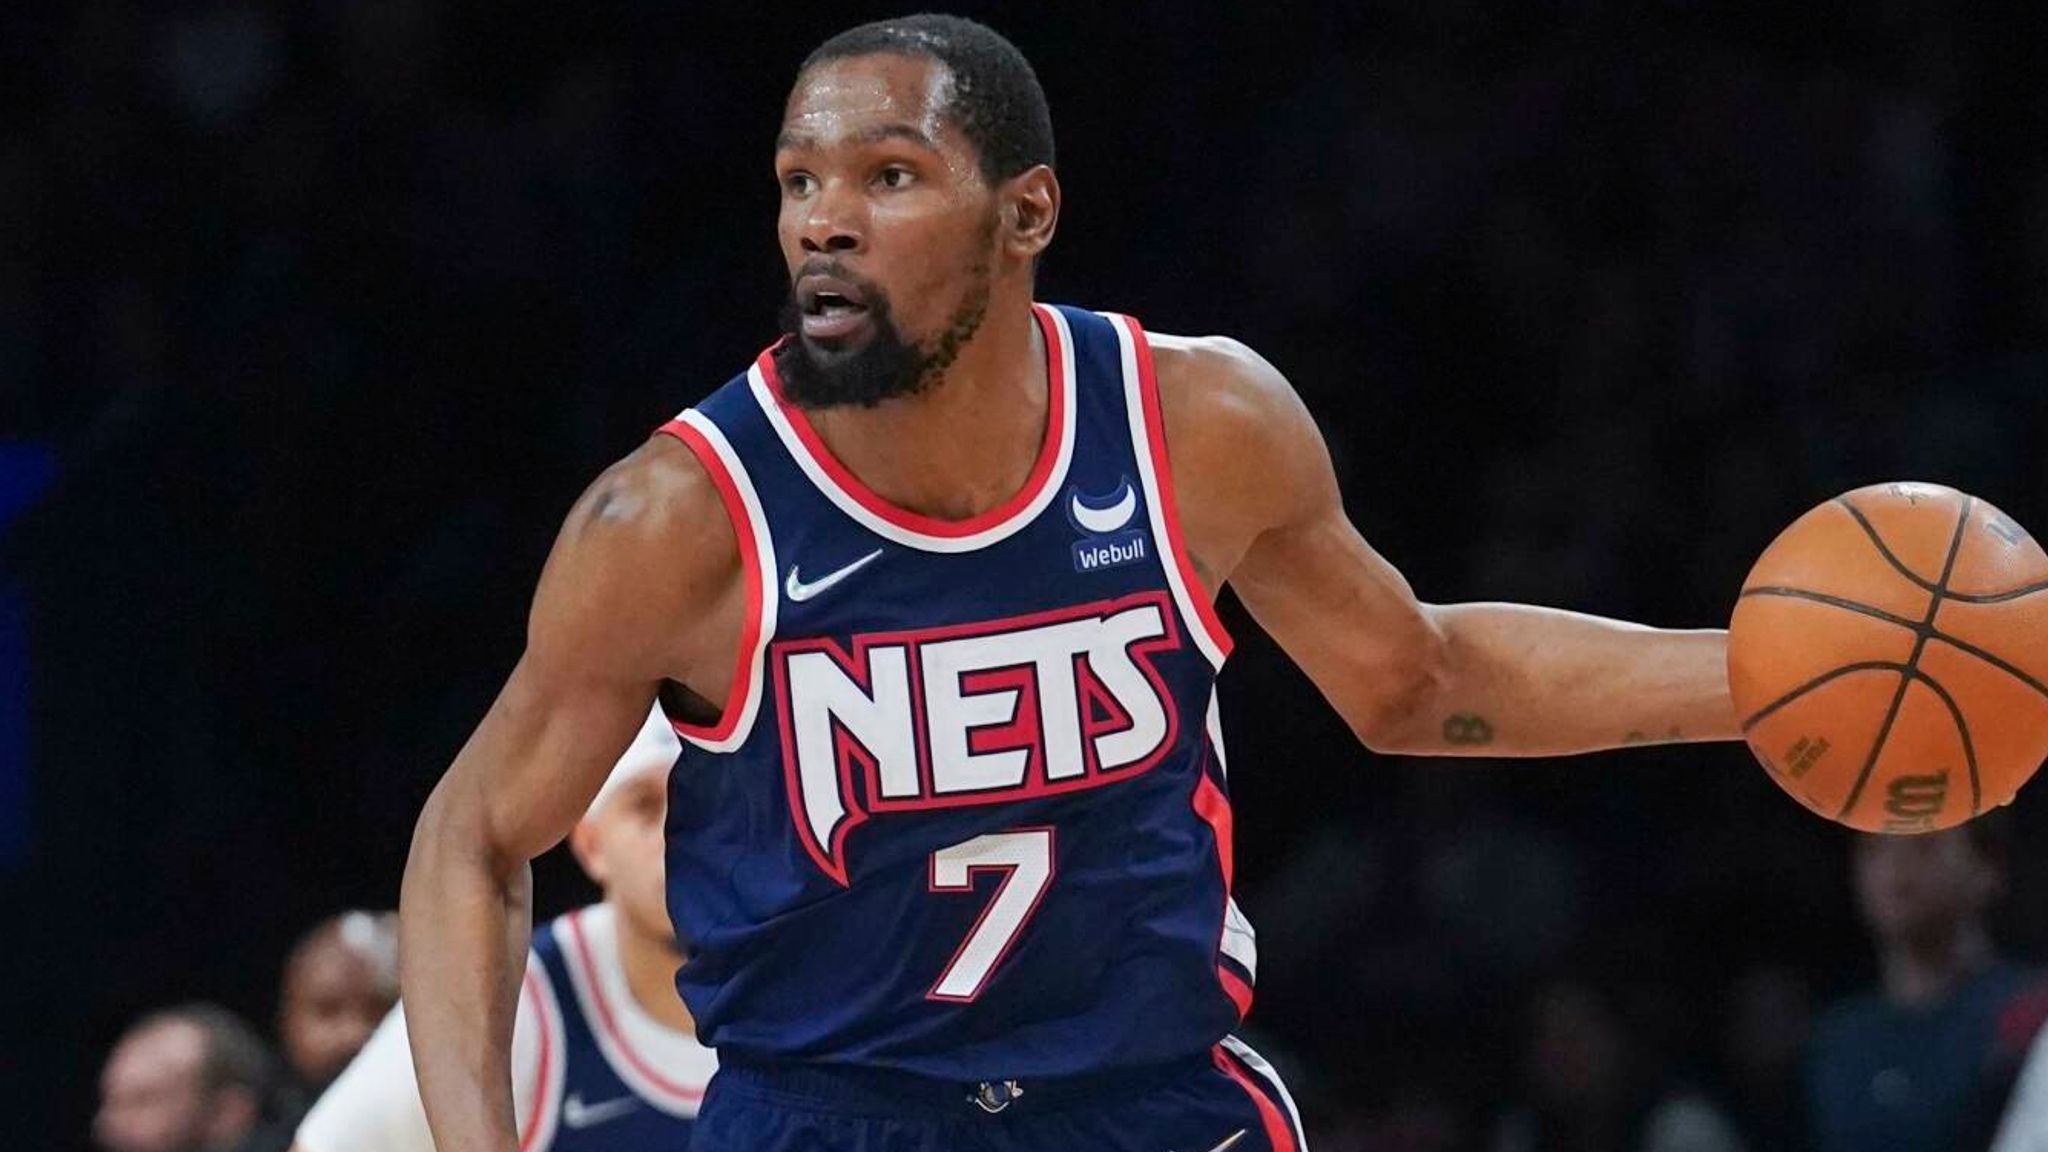 Kevin Durant's Nets-high 53-point classic leads Brooklyn past